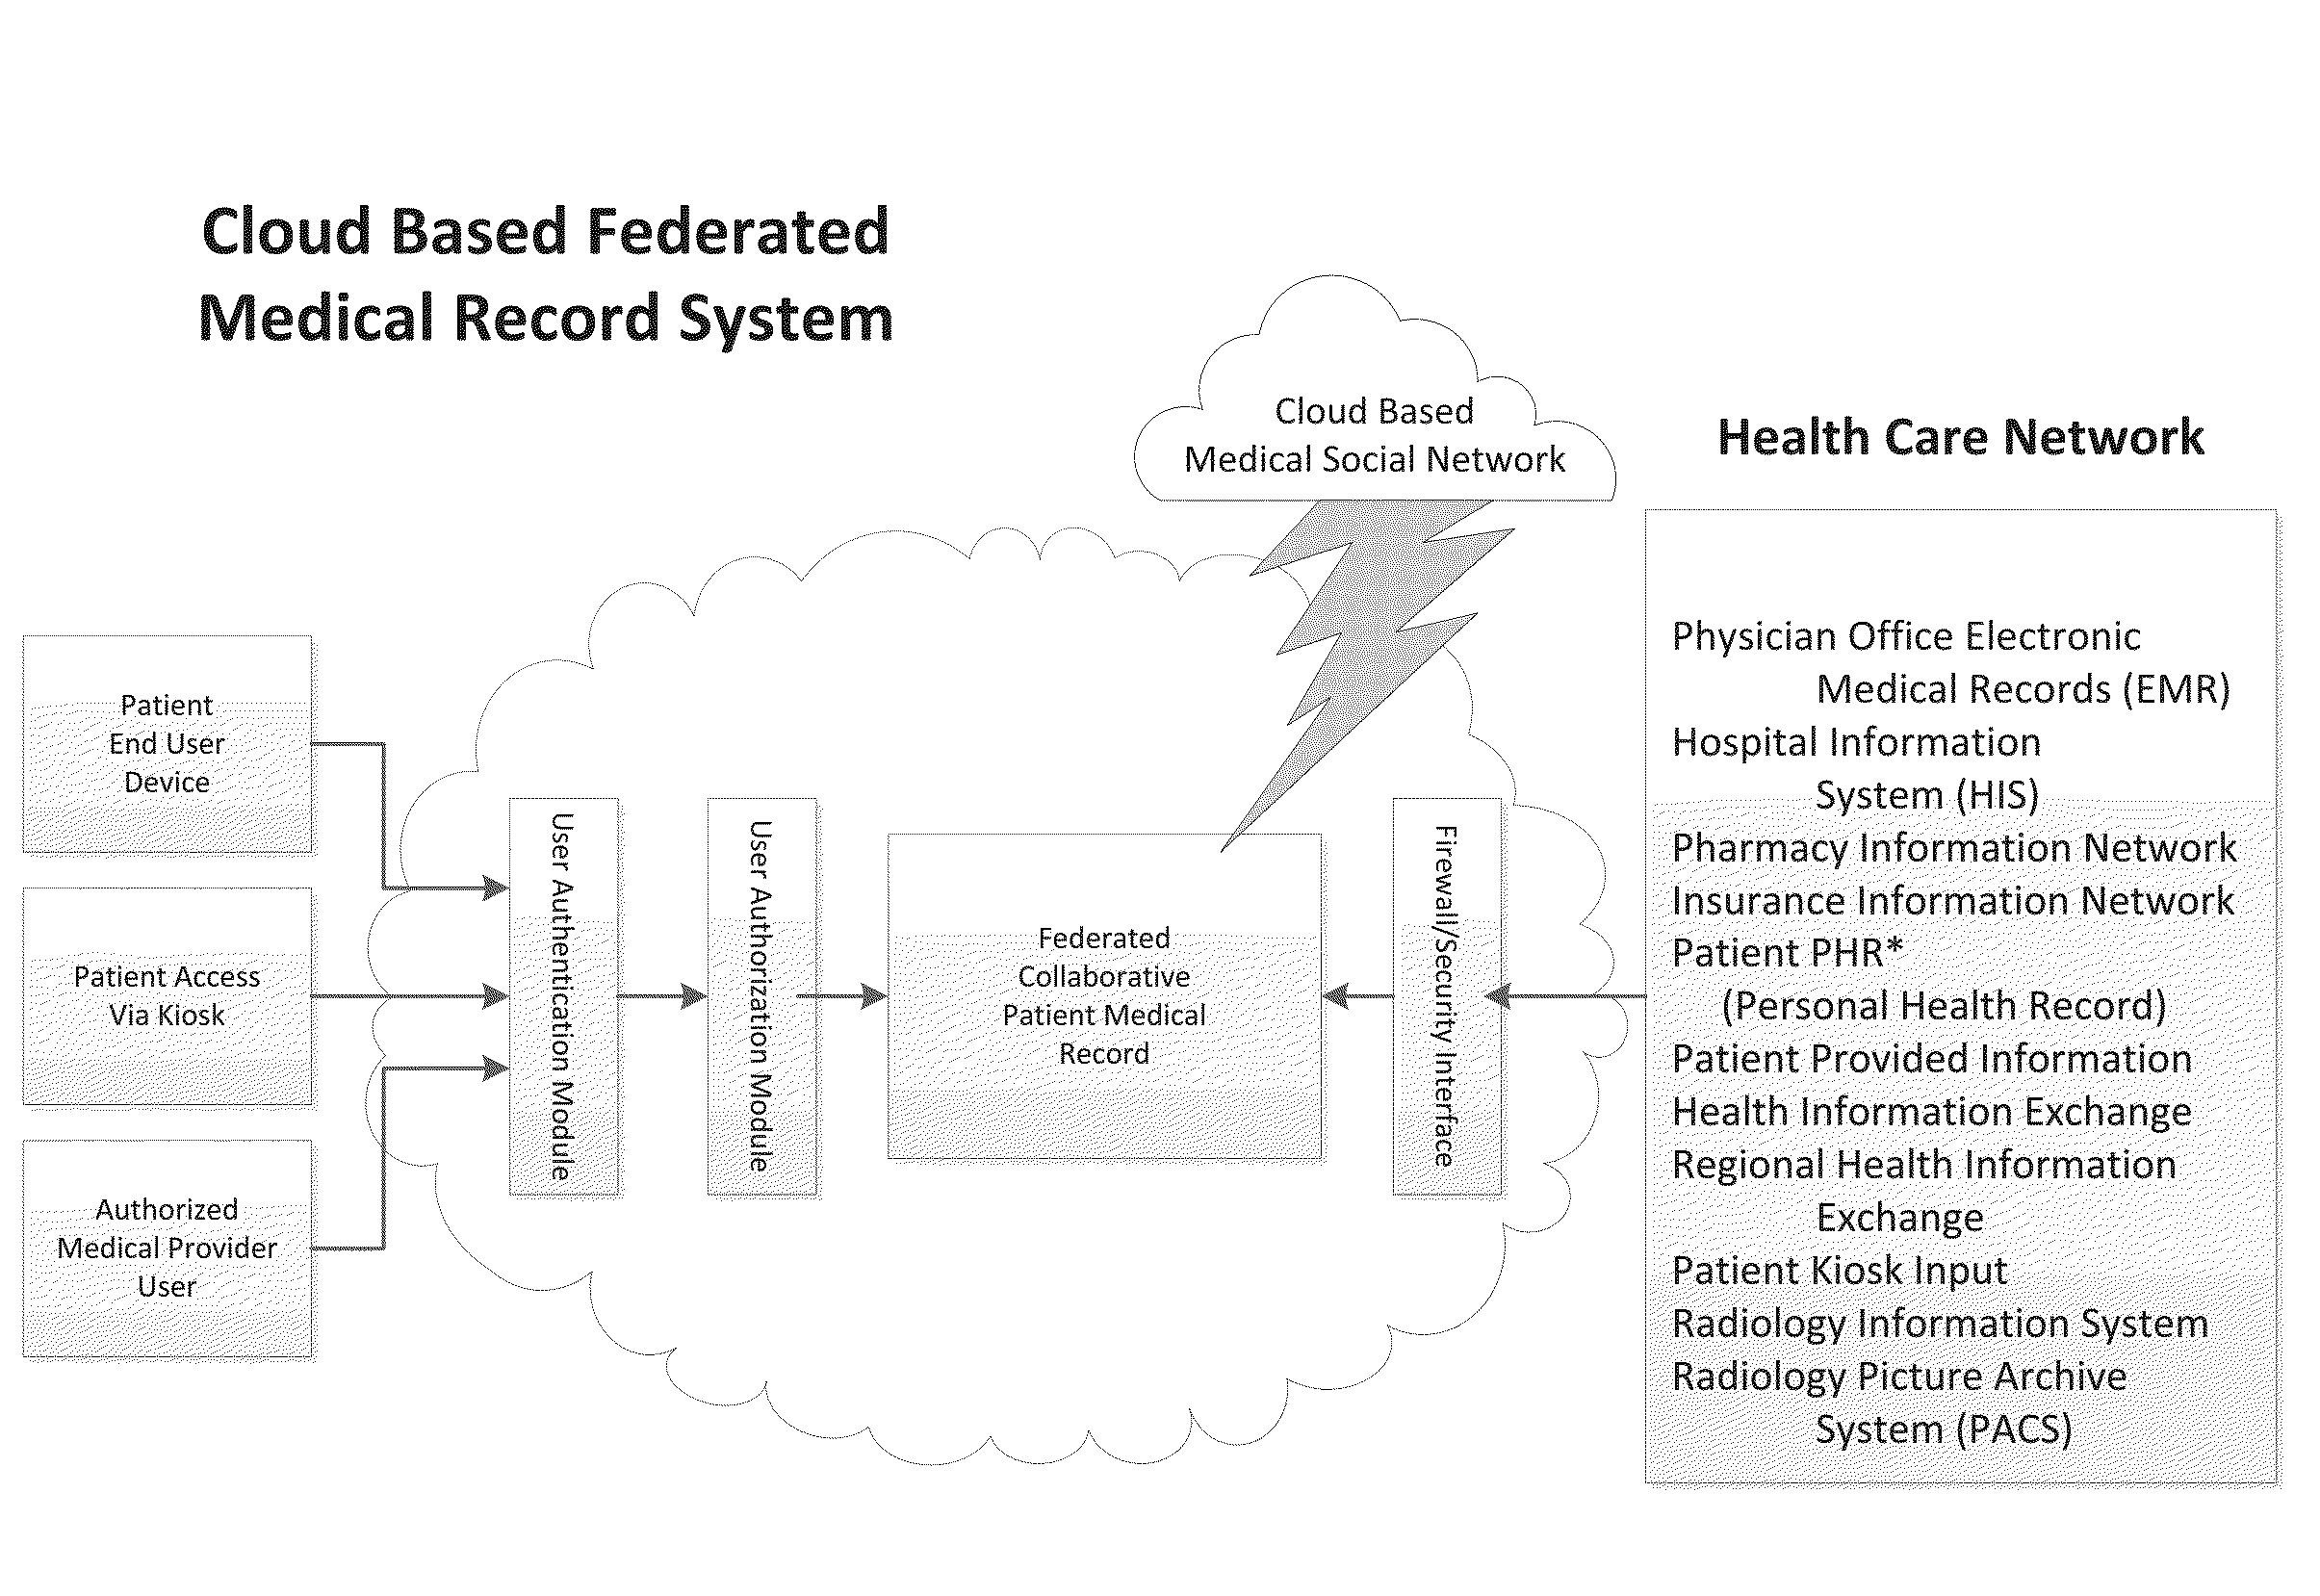 Federated Collaborative Medical Records System Utilizing Cloud Computing Network and Methods